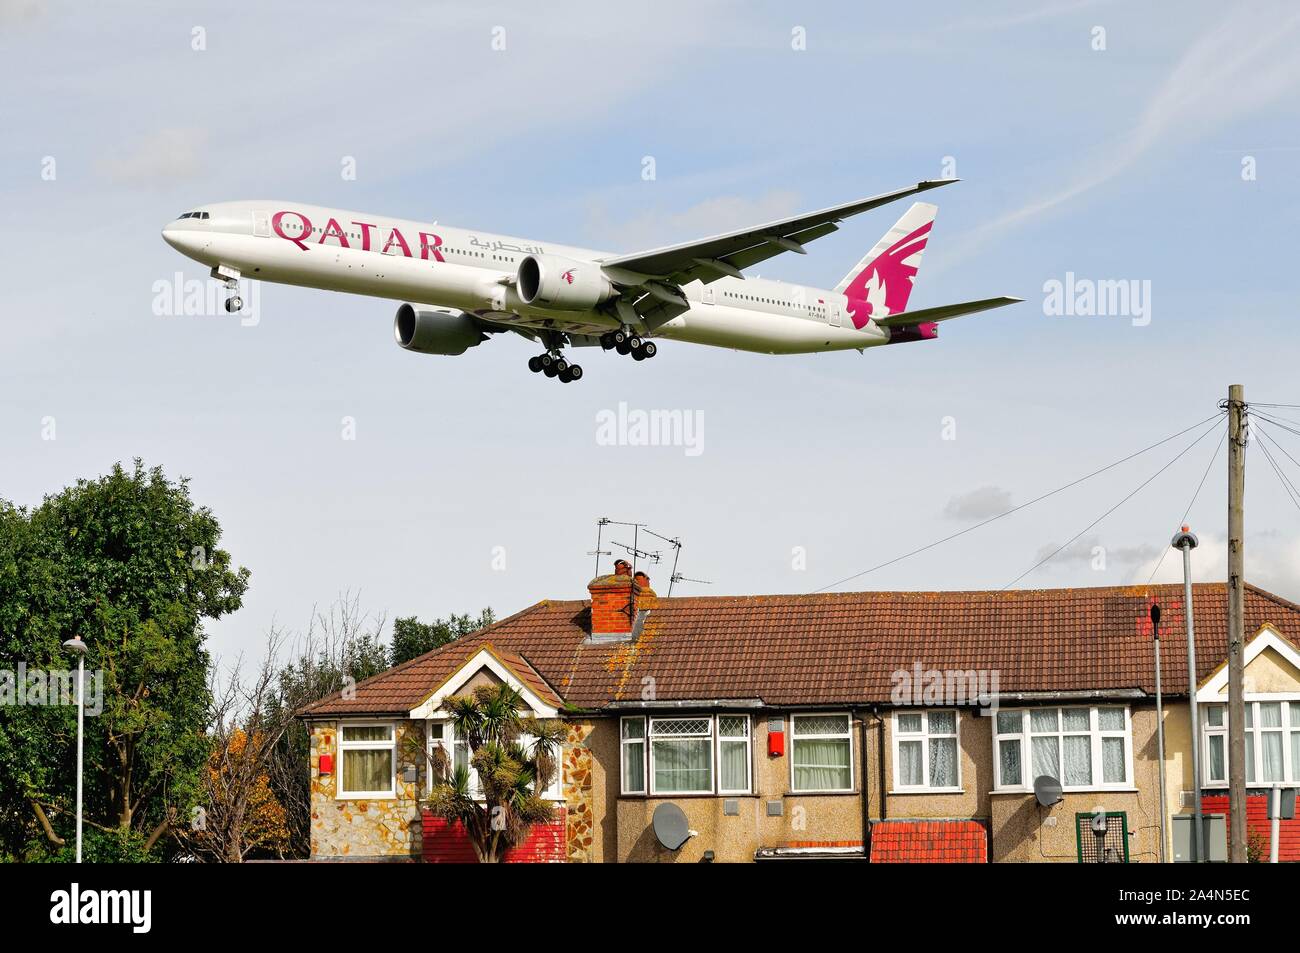 A Qatar Airways Boeing 777-300 jet flying low over rooftops at Hatton Cross on it's landing approach to Heathrow London England UK Stock Photo